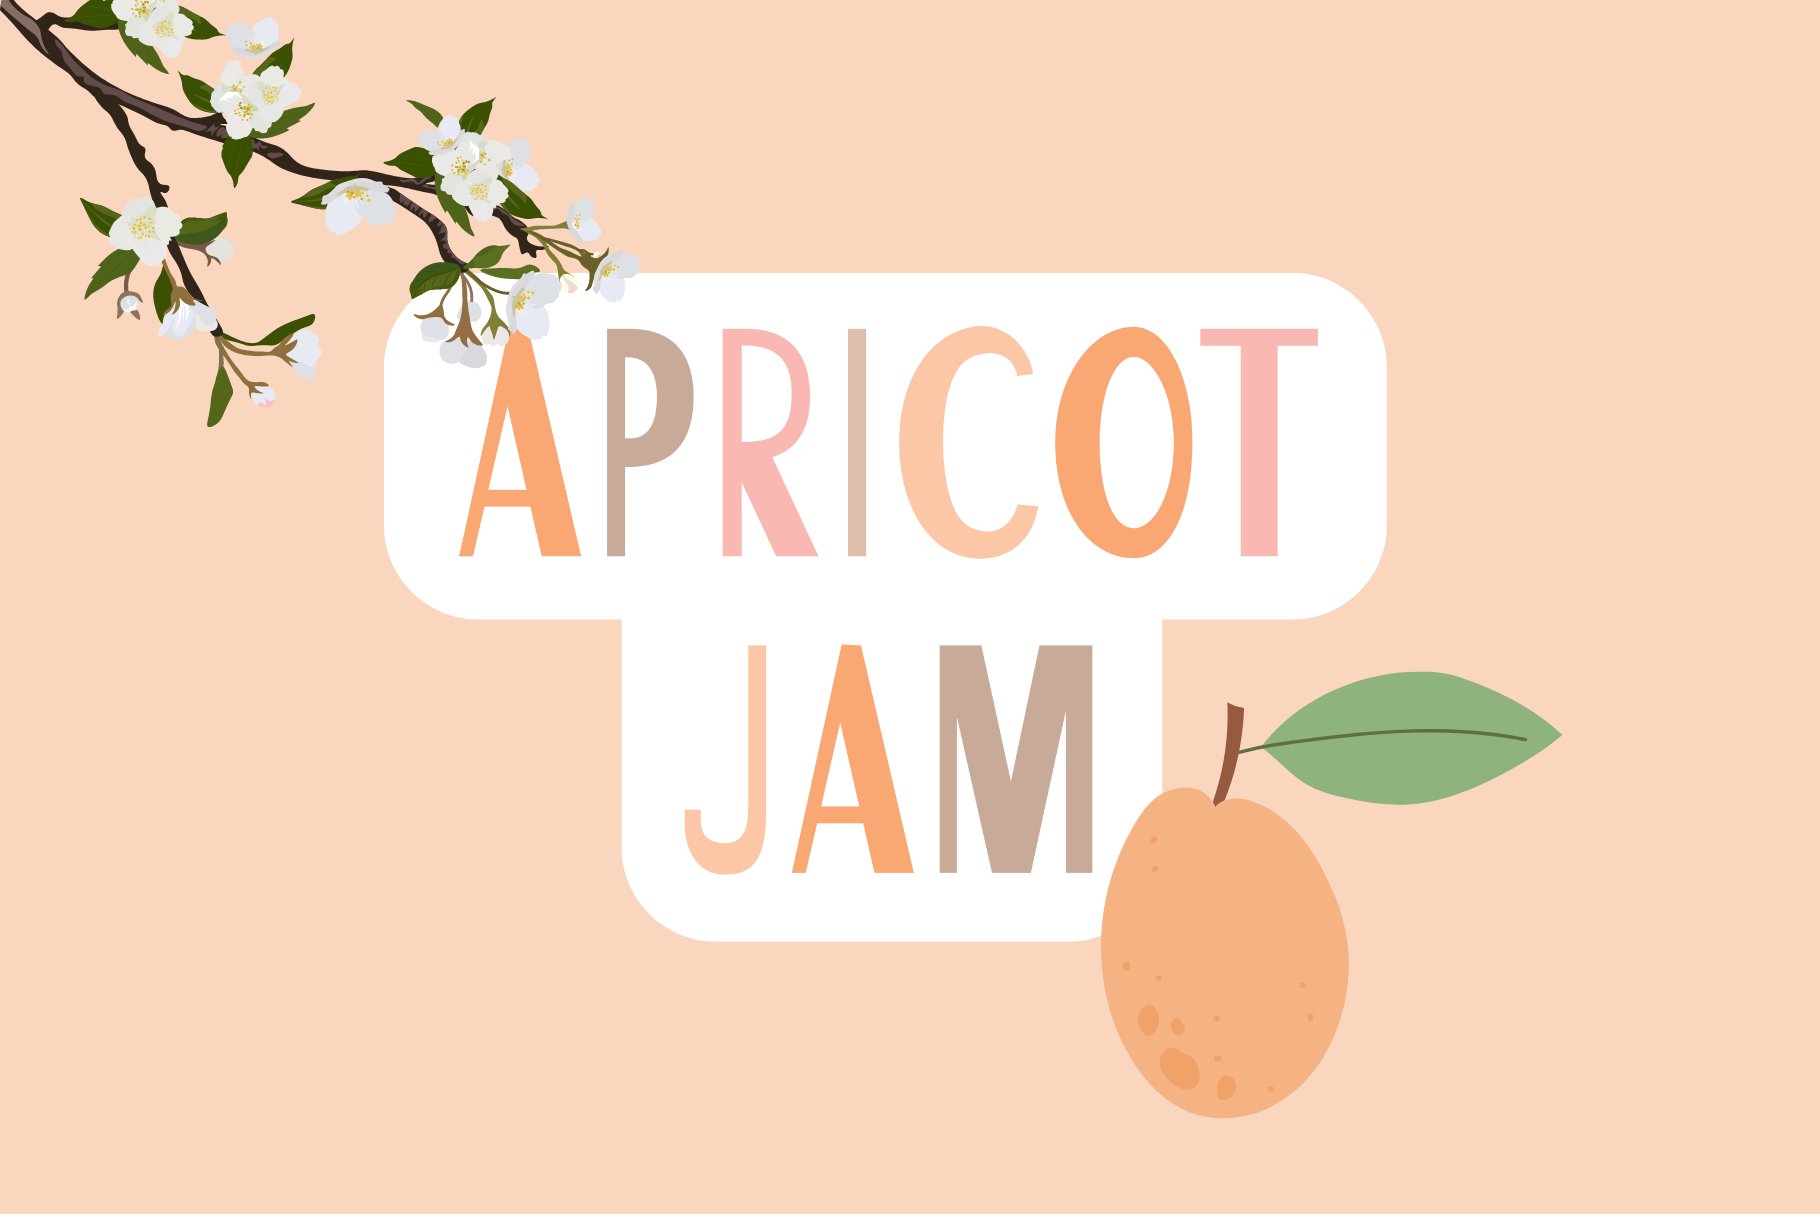 Apricot Jam cover image.